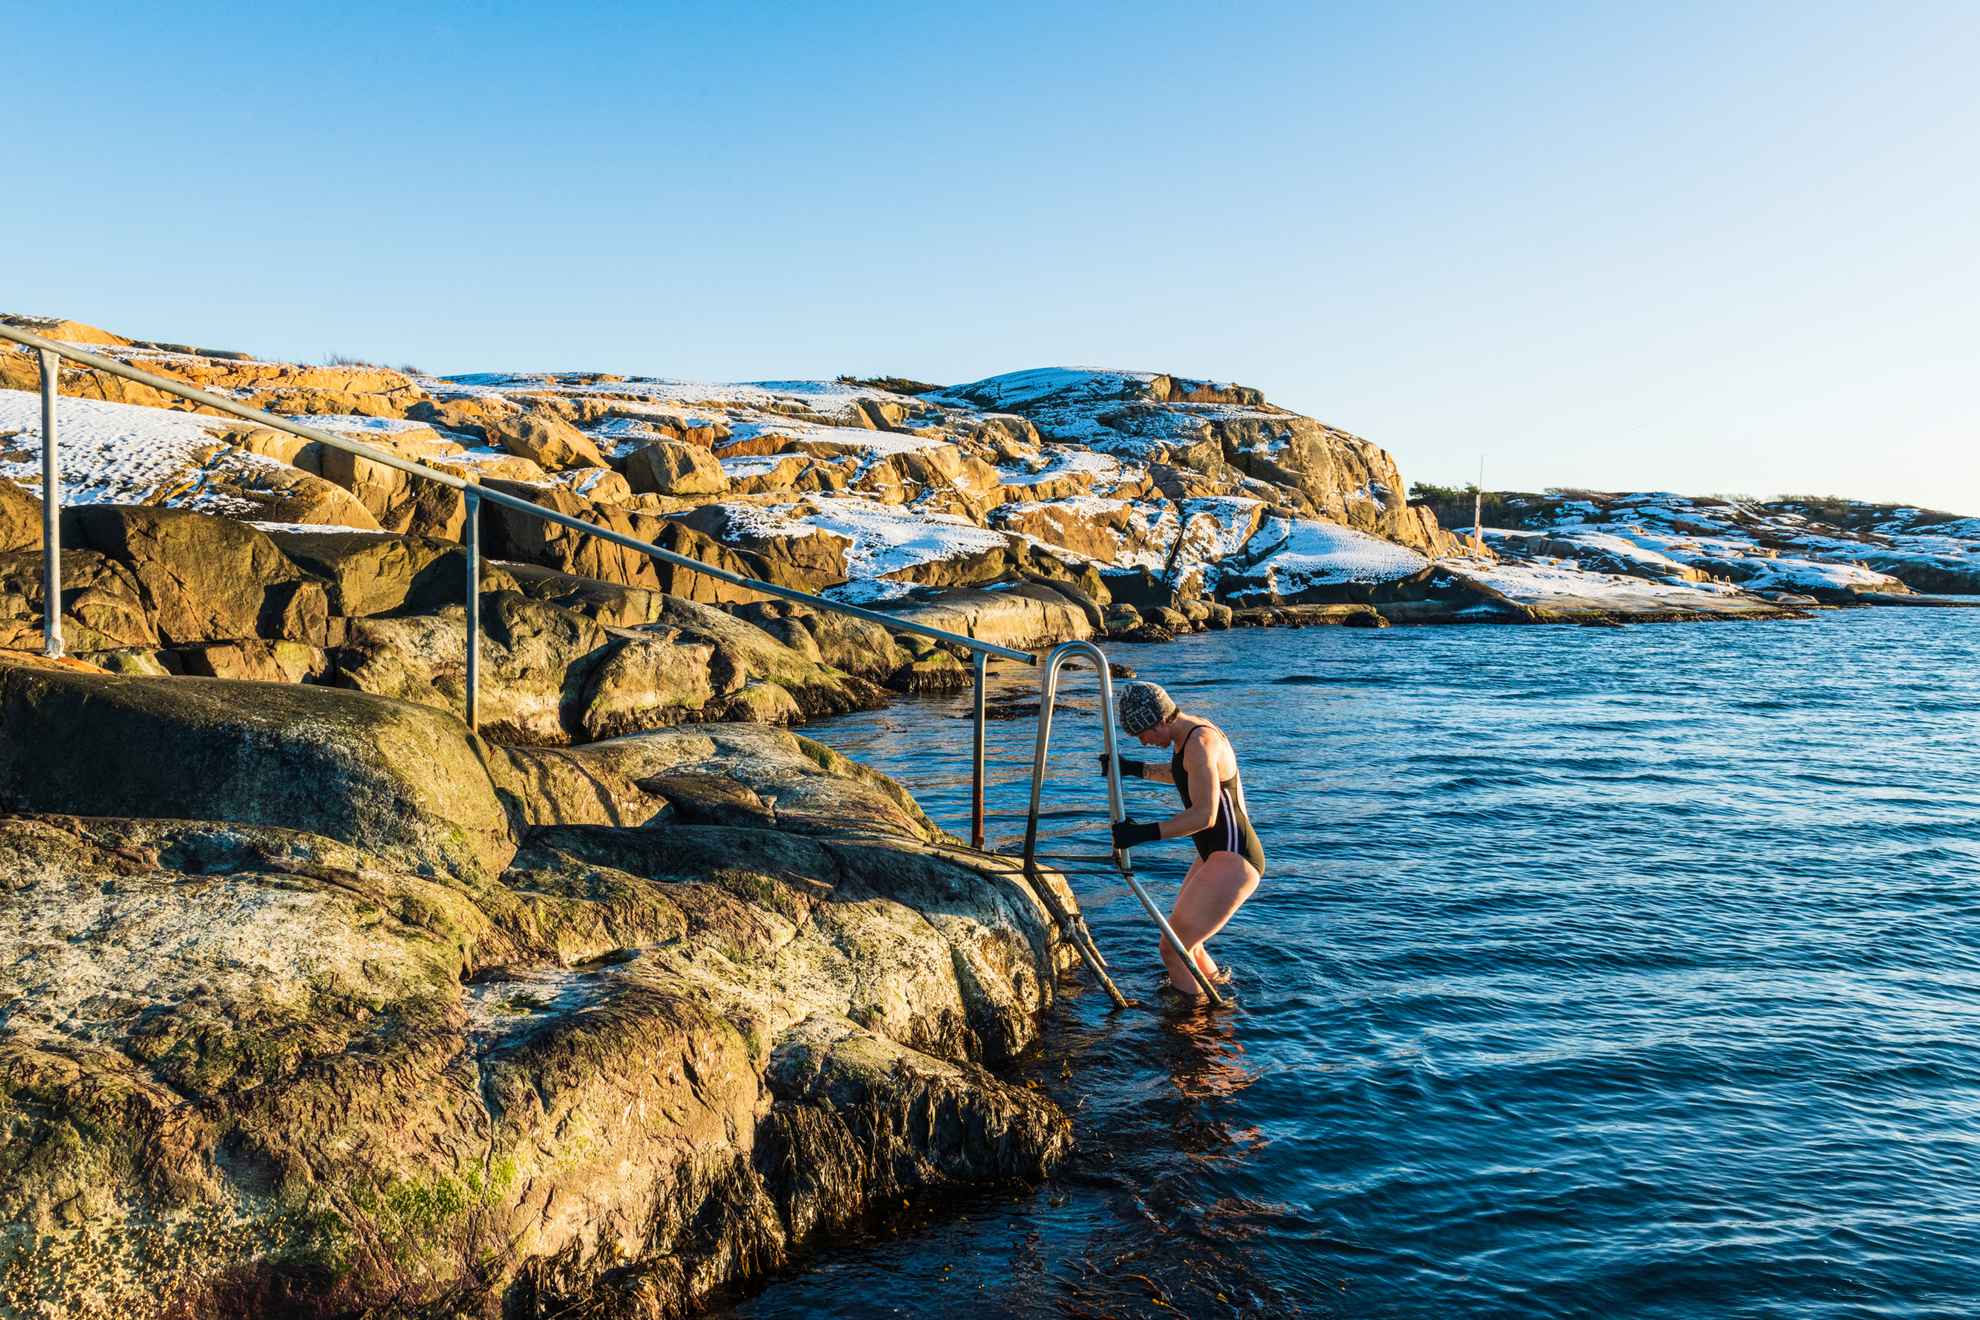 A woman is bathing in the sea during winter.